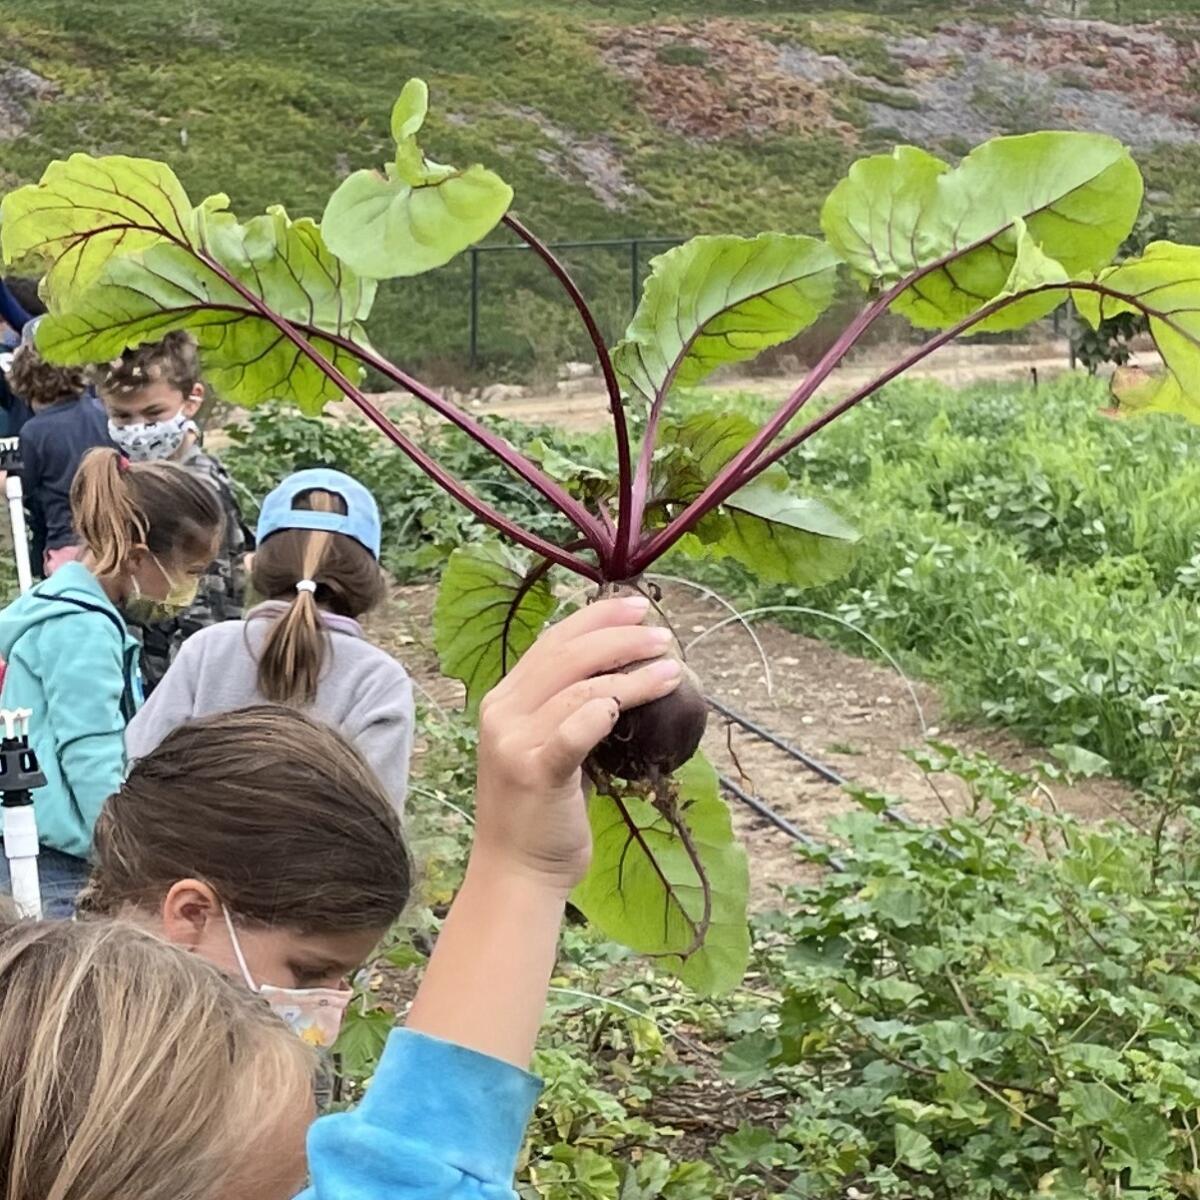 Students check out the produce at Encinitas Union School District's Farm Lab.